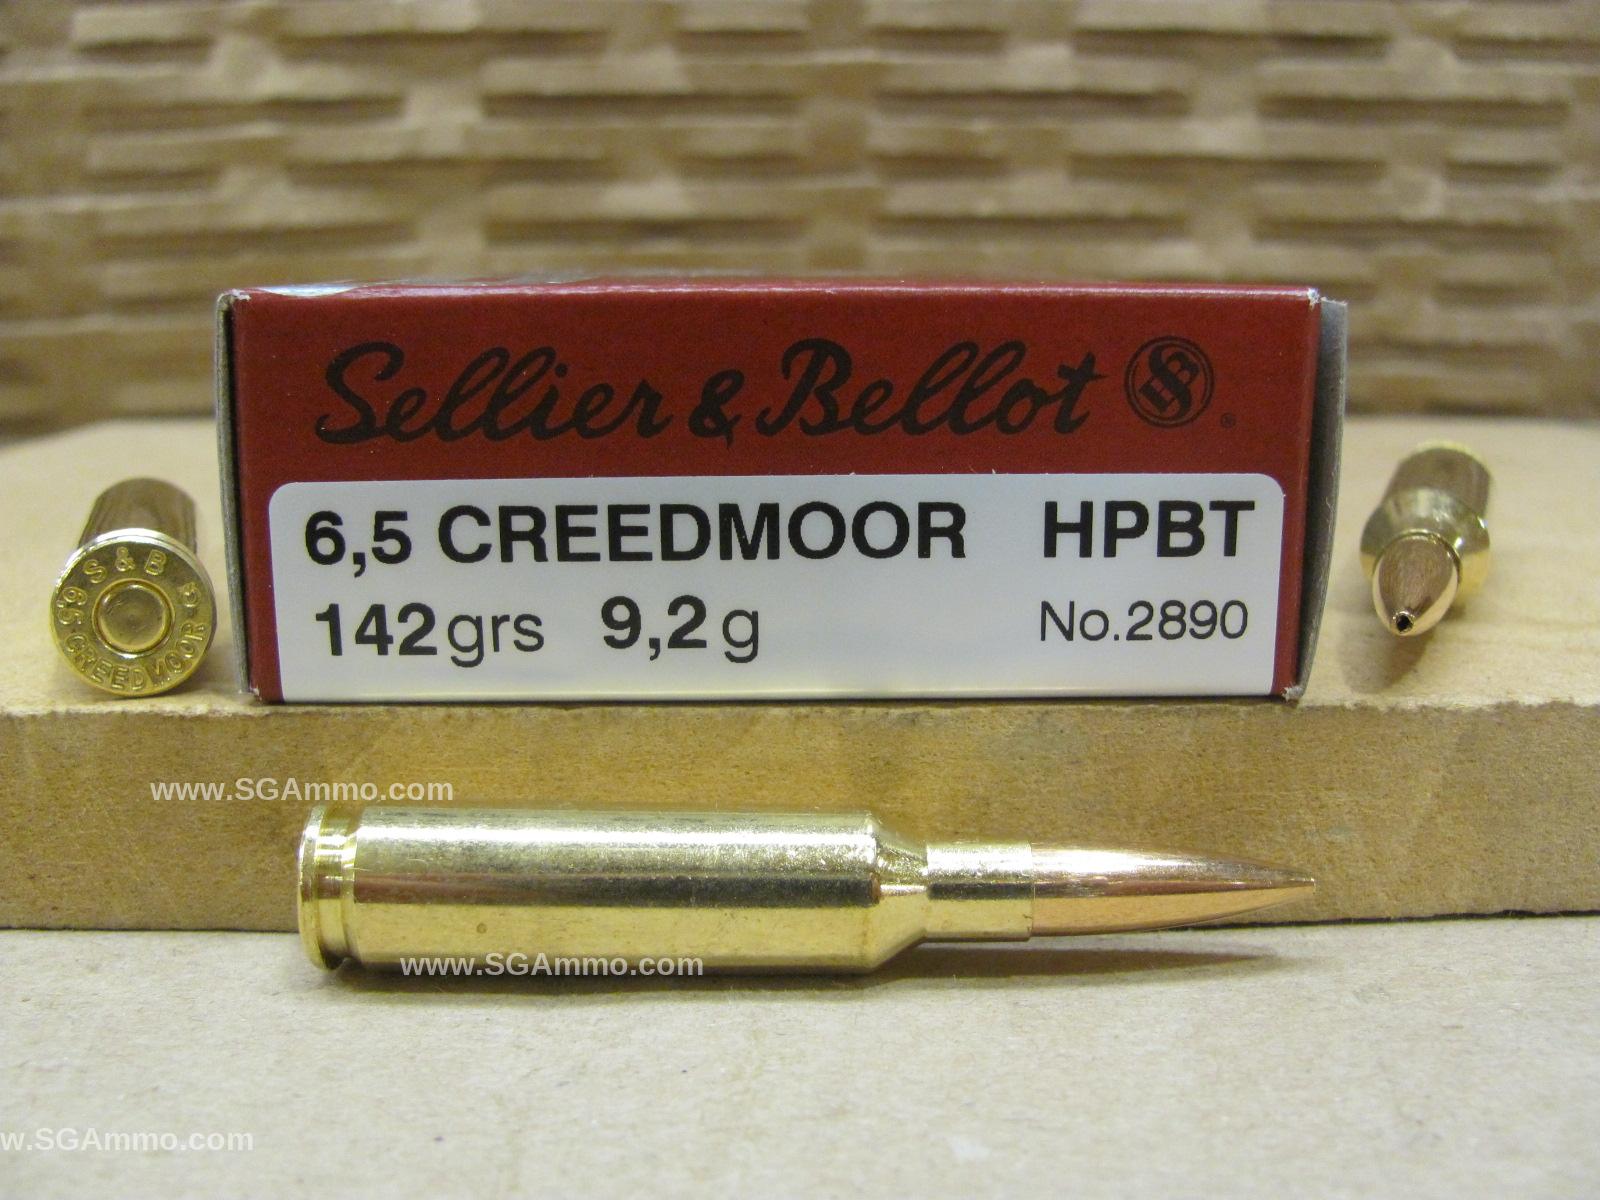 200 Round Can - 6.5 Creedmoor 142 Grain Hollow Point HPBT Sellier Bellot Precision Ammo - SB65E - Packed in M19A1 Canister